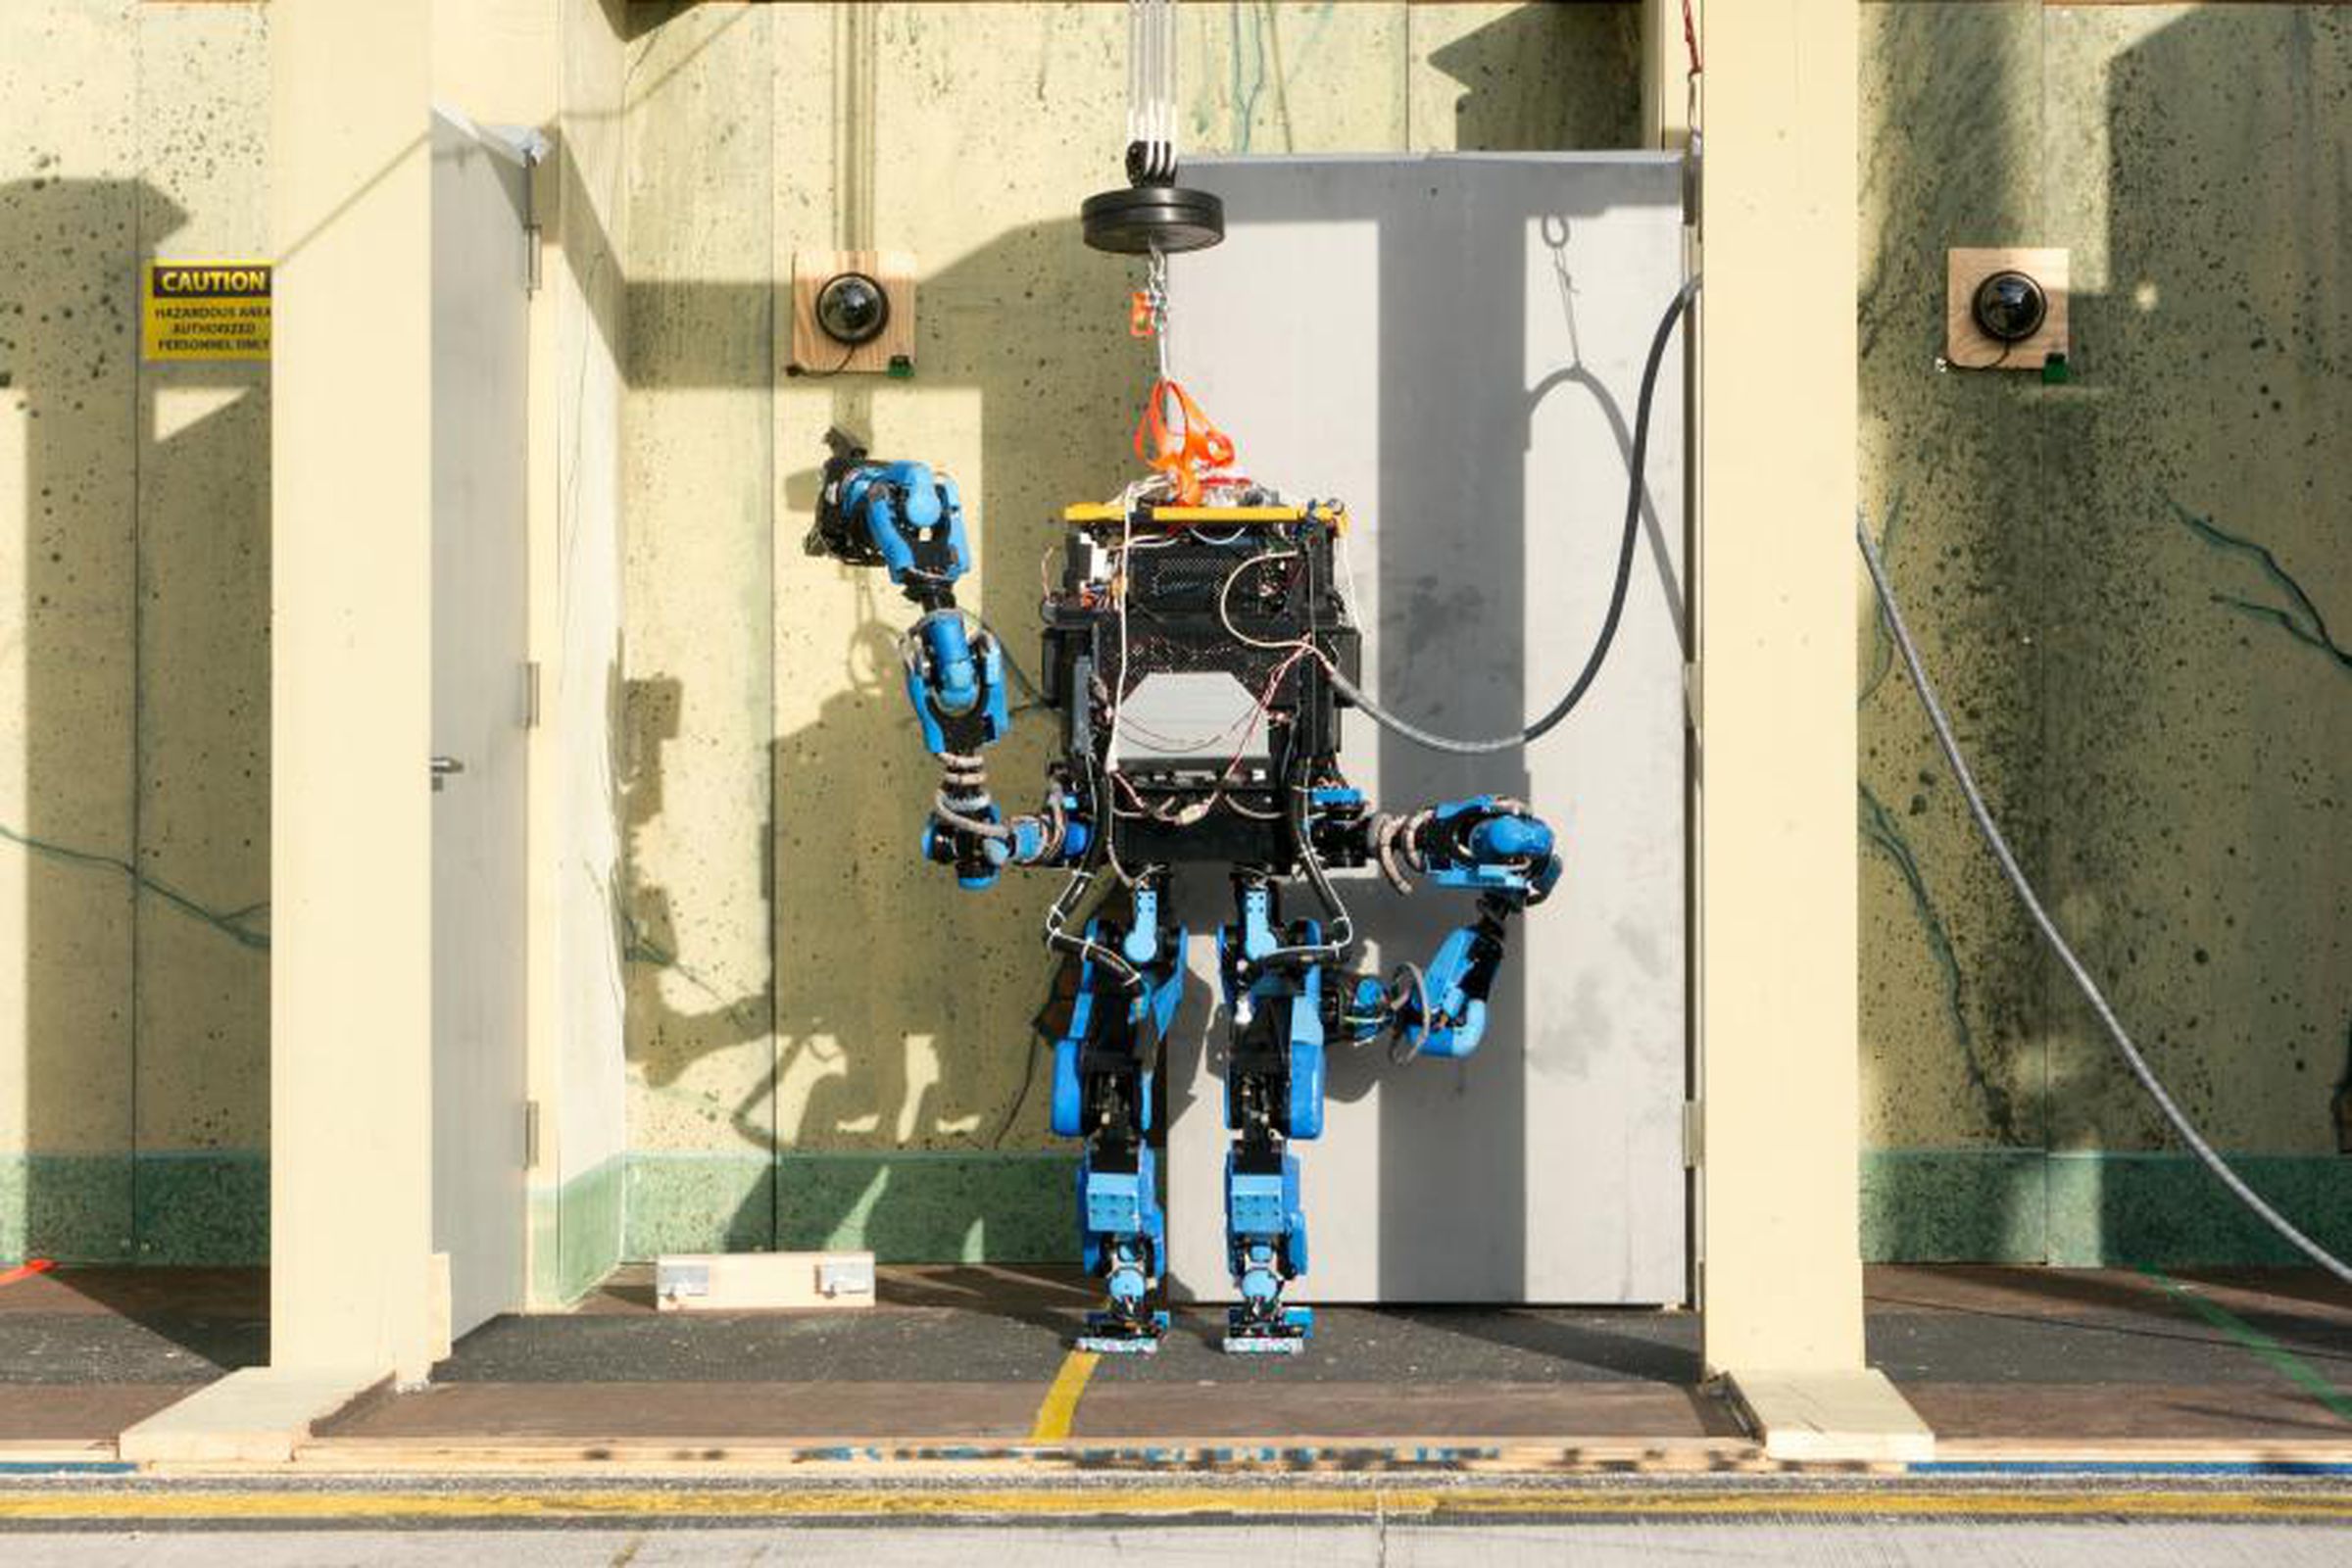 Schaft’s upright robots competed in the DARPA Robotics Challenge (DRC) in 2013. 